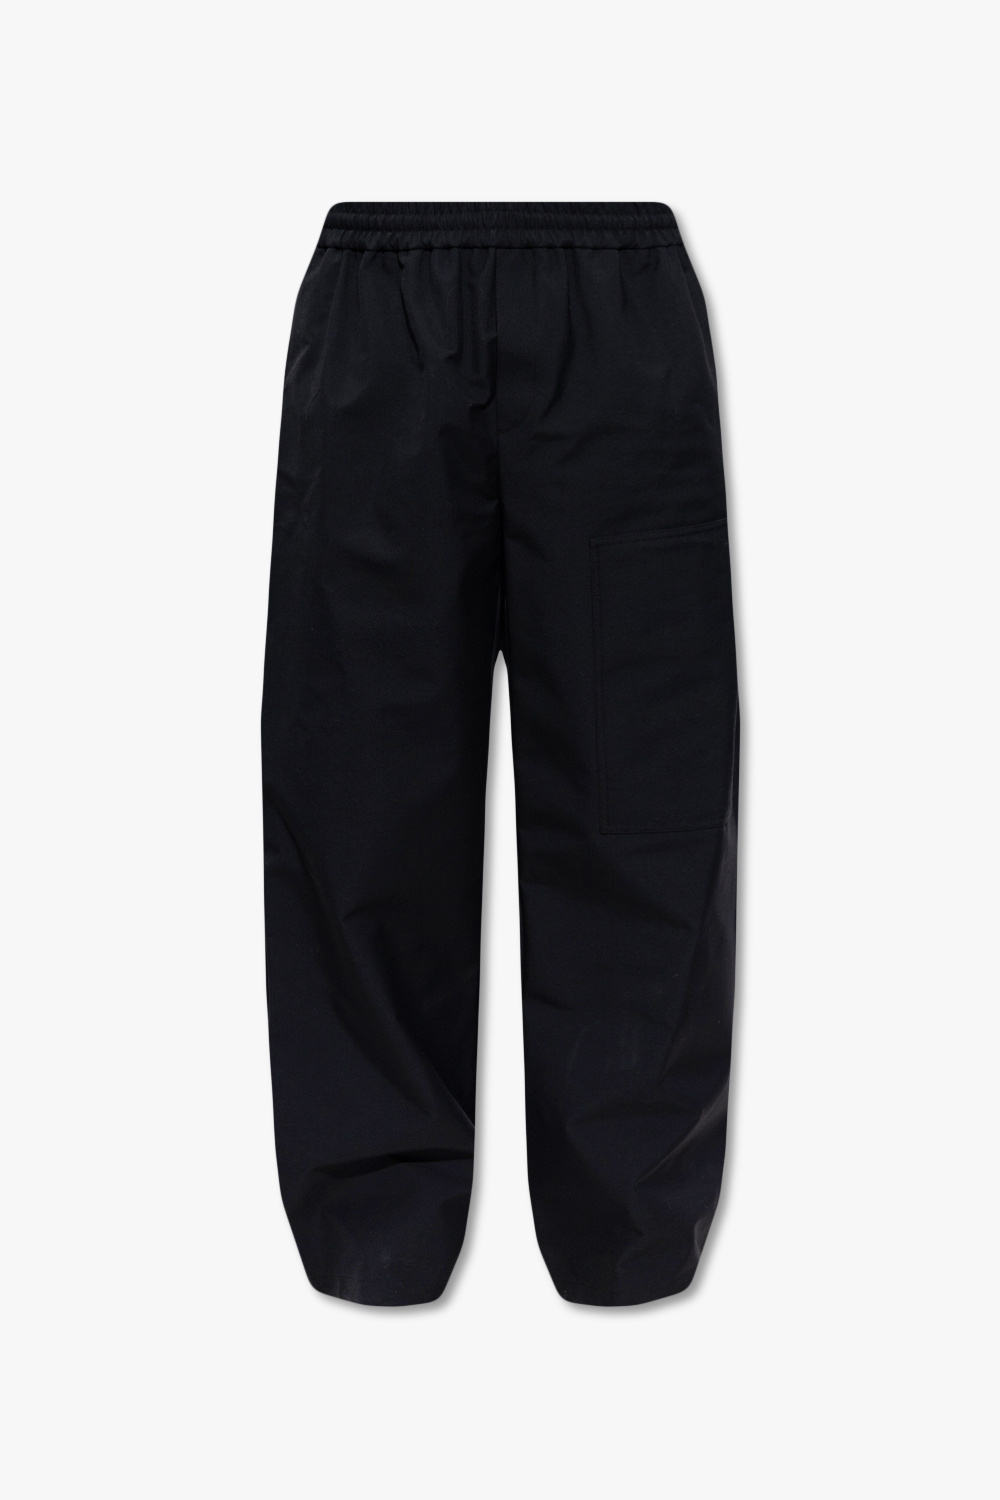 Off-White trousers asymmetric with wide legs